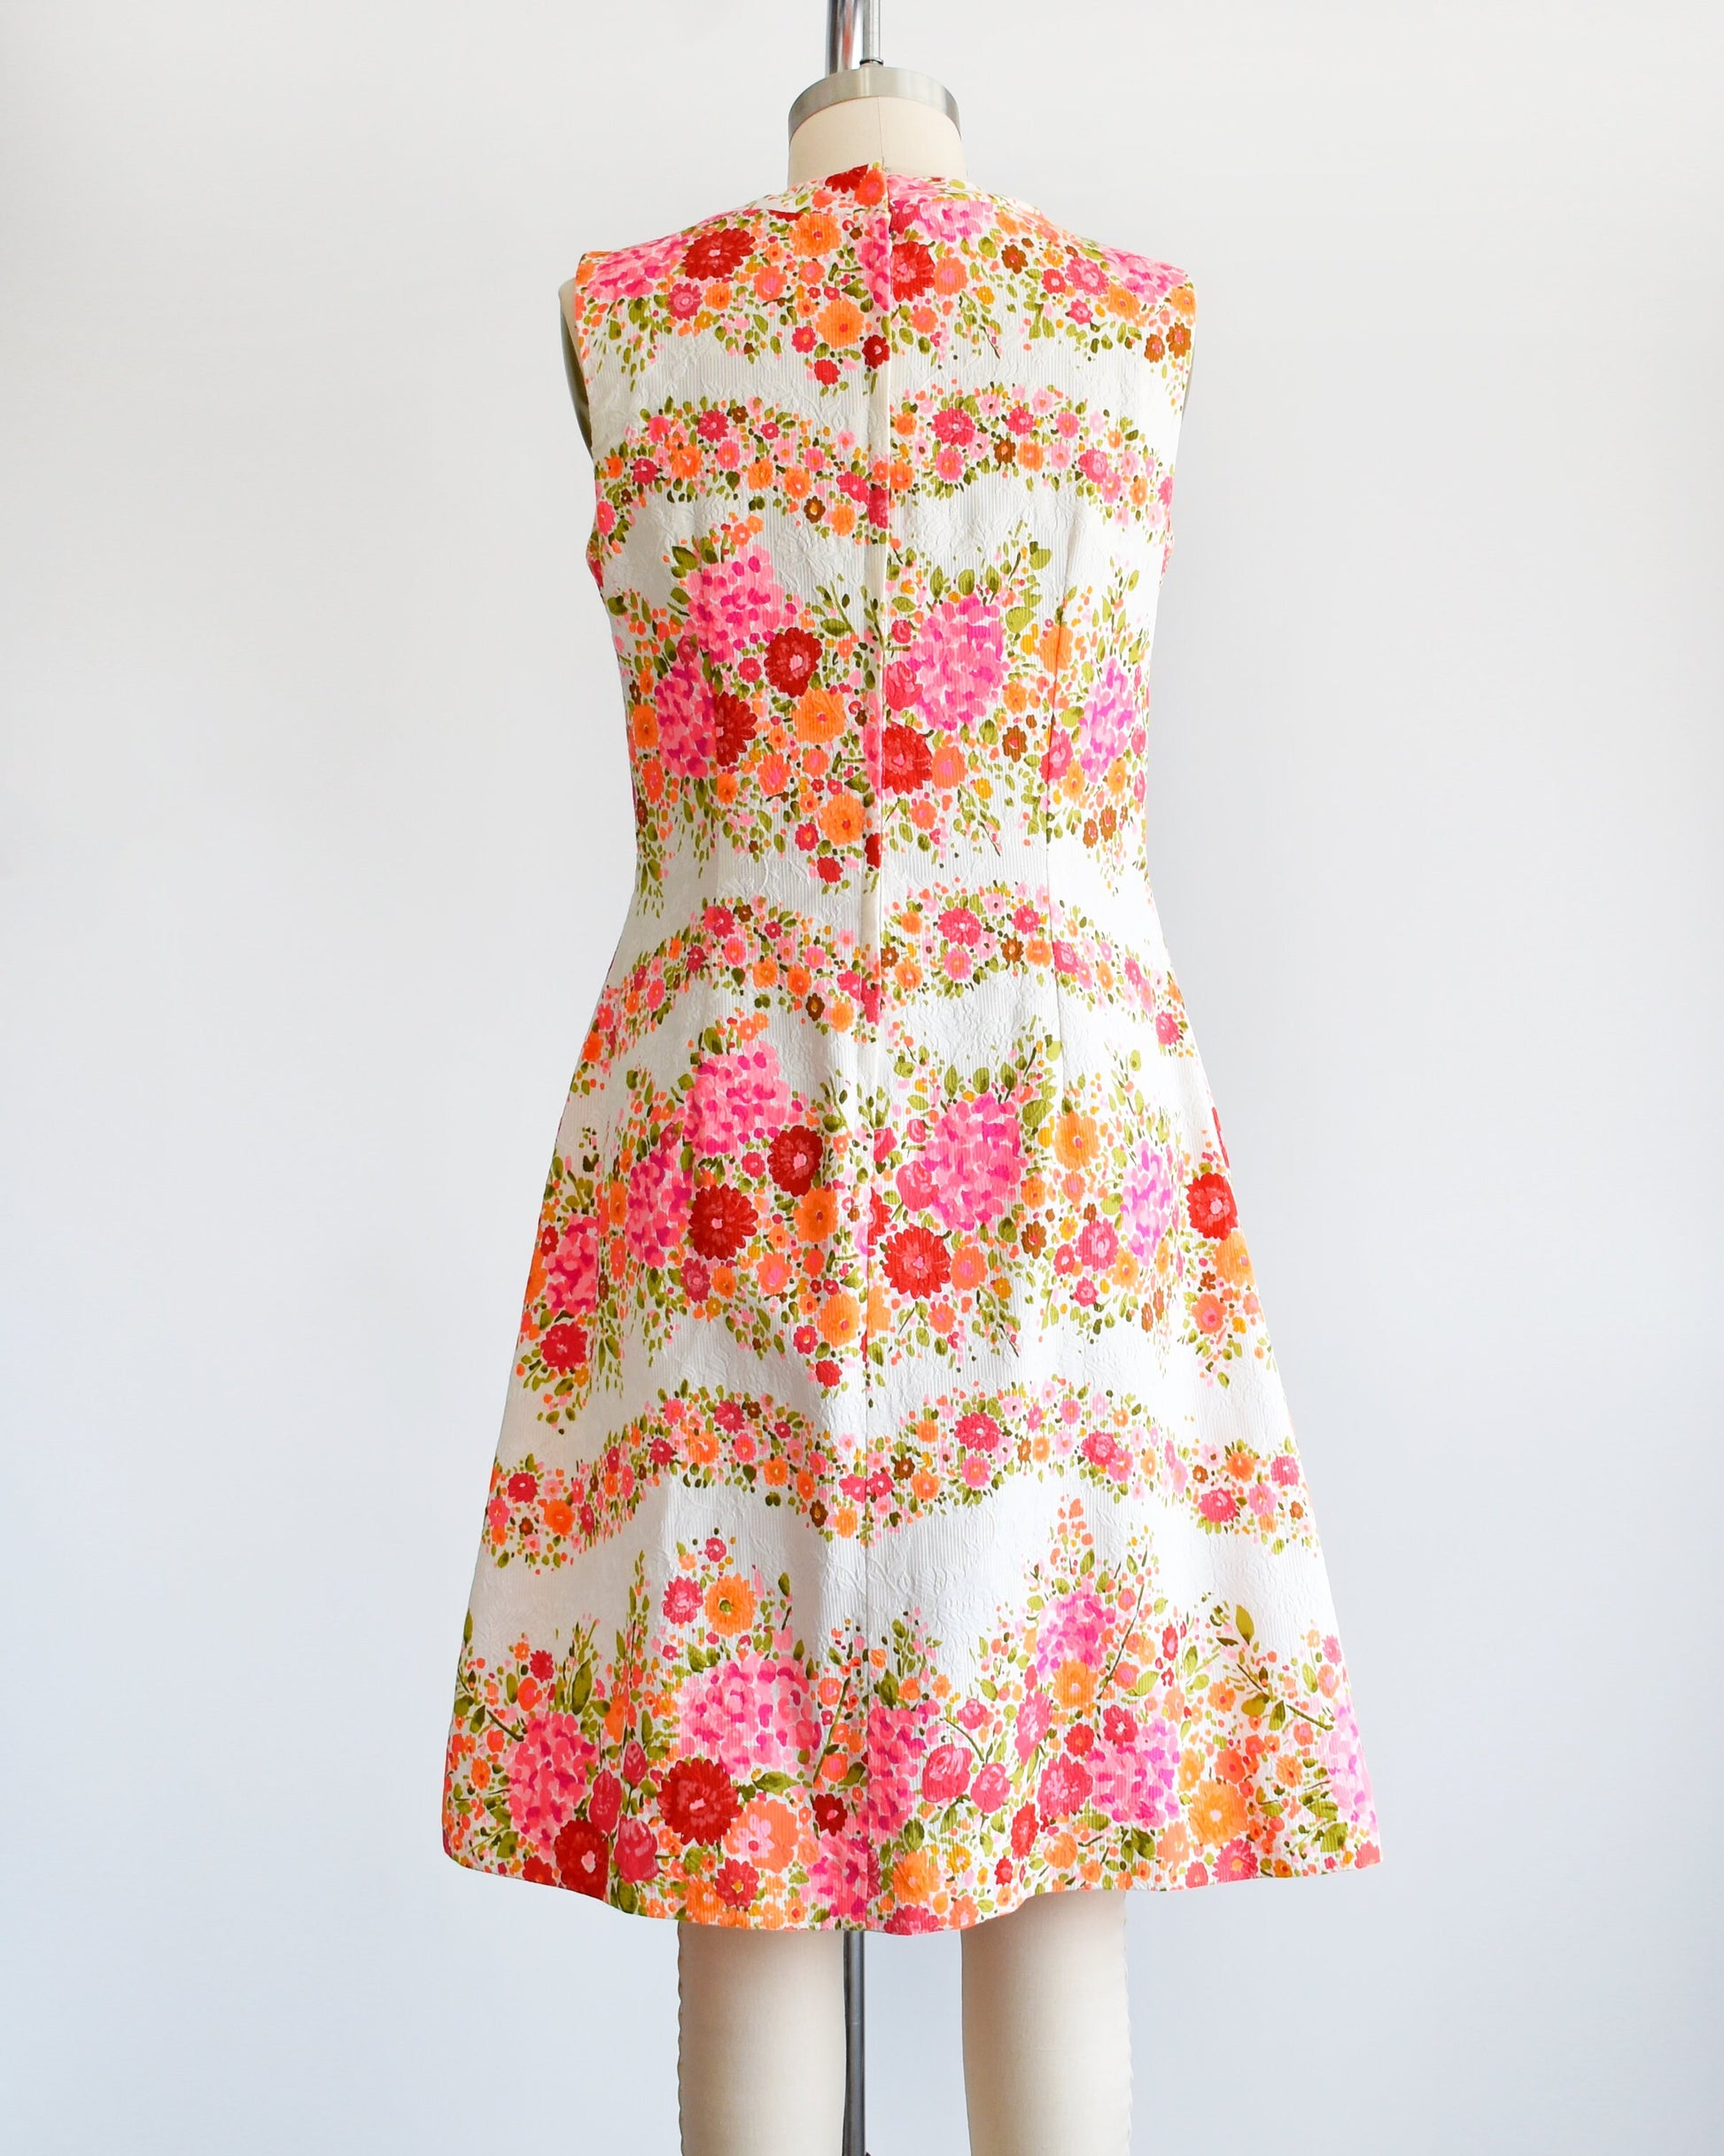 Back view of a vintage 60s/70s white dress that has a vibrant pink, orange, and green floral print in wavy horizontal stripes going down the dress. There is a zipper up the back. The dress is on a dress form.